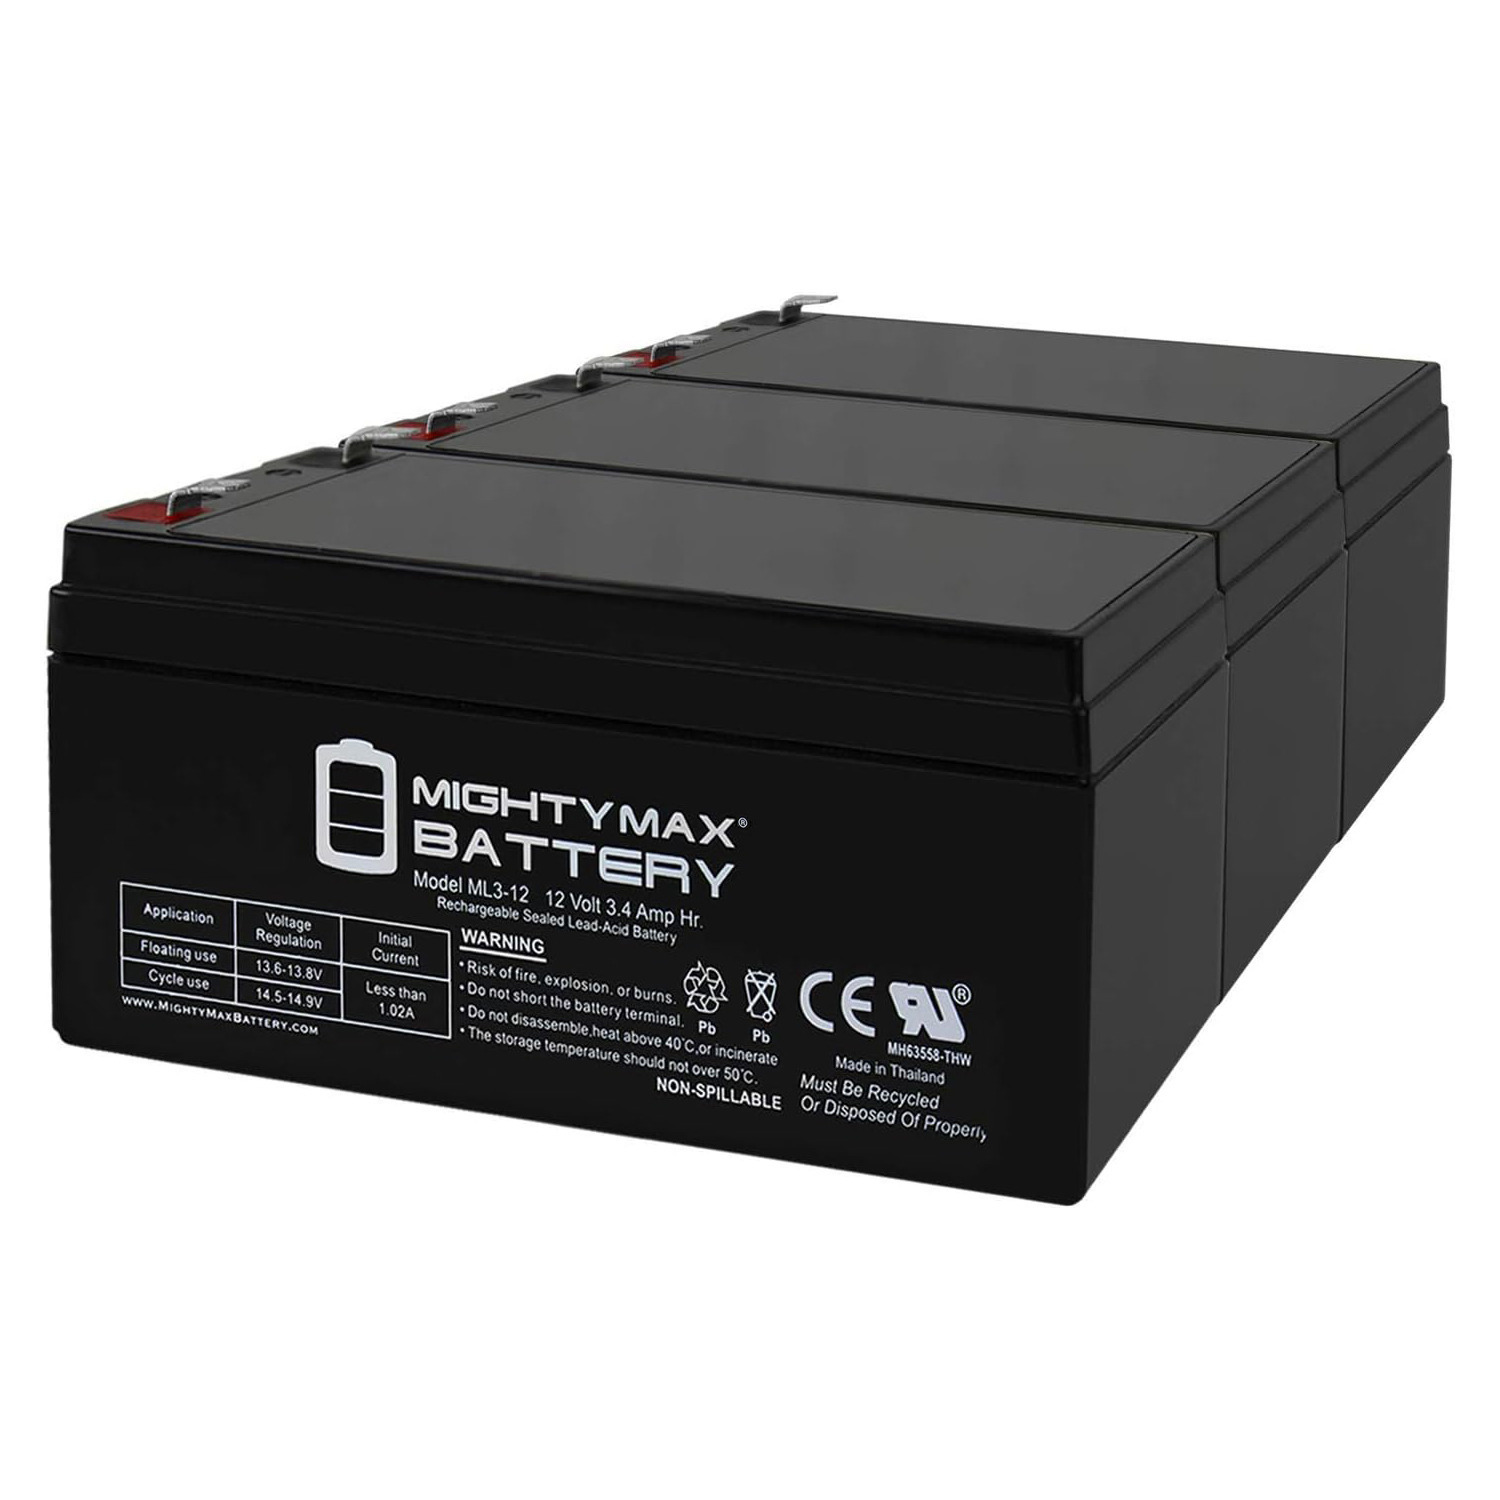 12V 3AH SLA Replacement Battery for PPG Biomedical Systems - 3 Pack